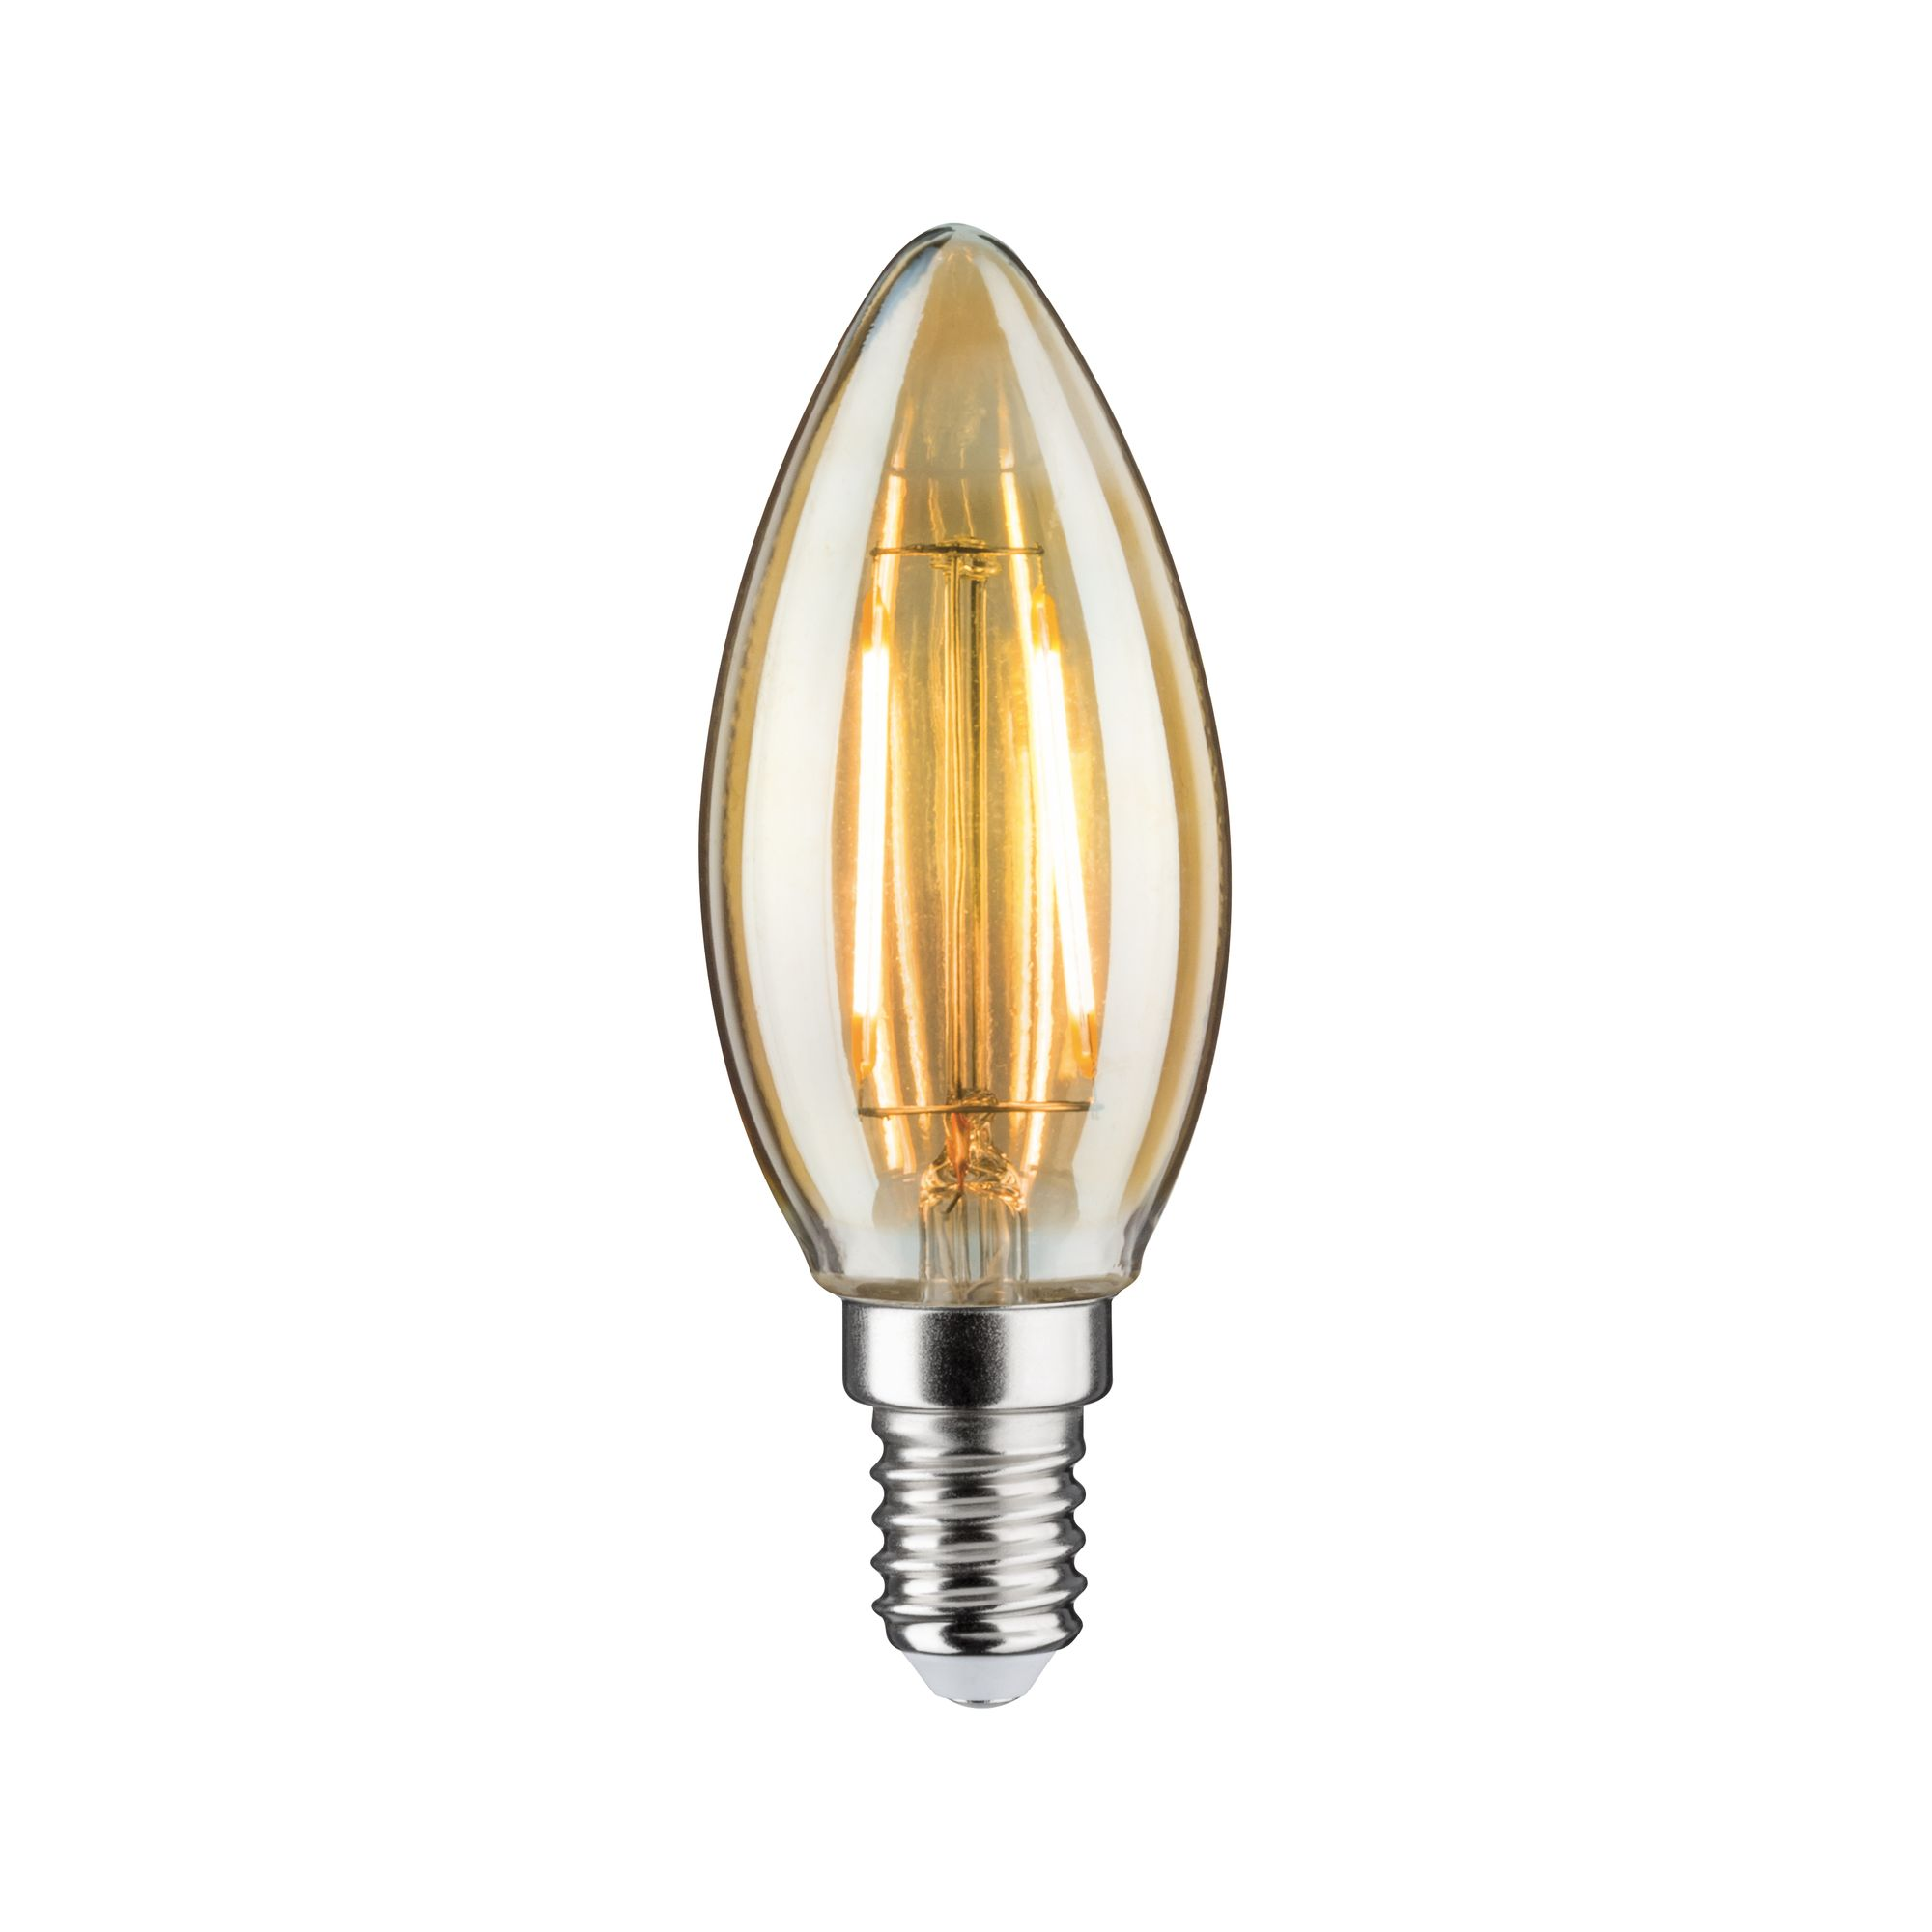 LED-Kerzenlampe E14 2,6W (26W) 260 lm warmgold + product picture